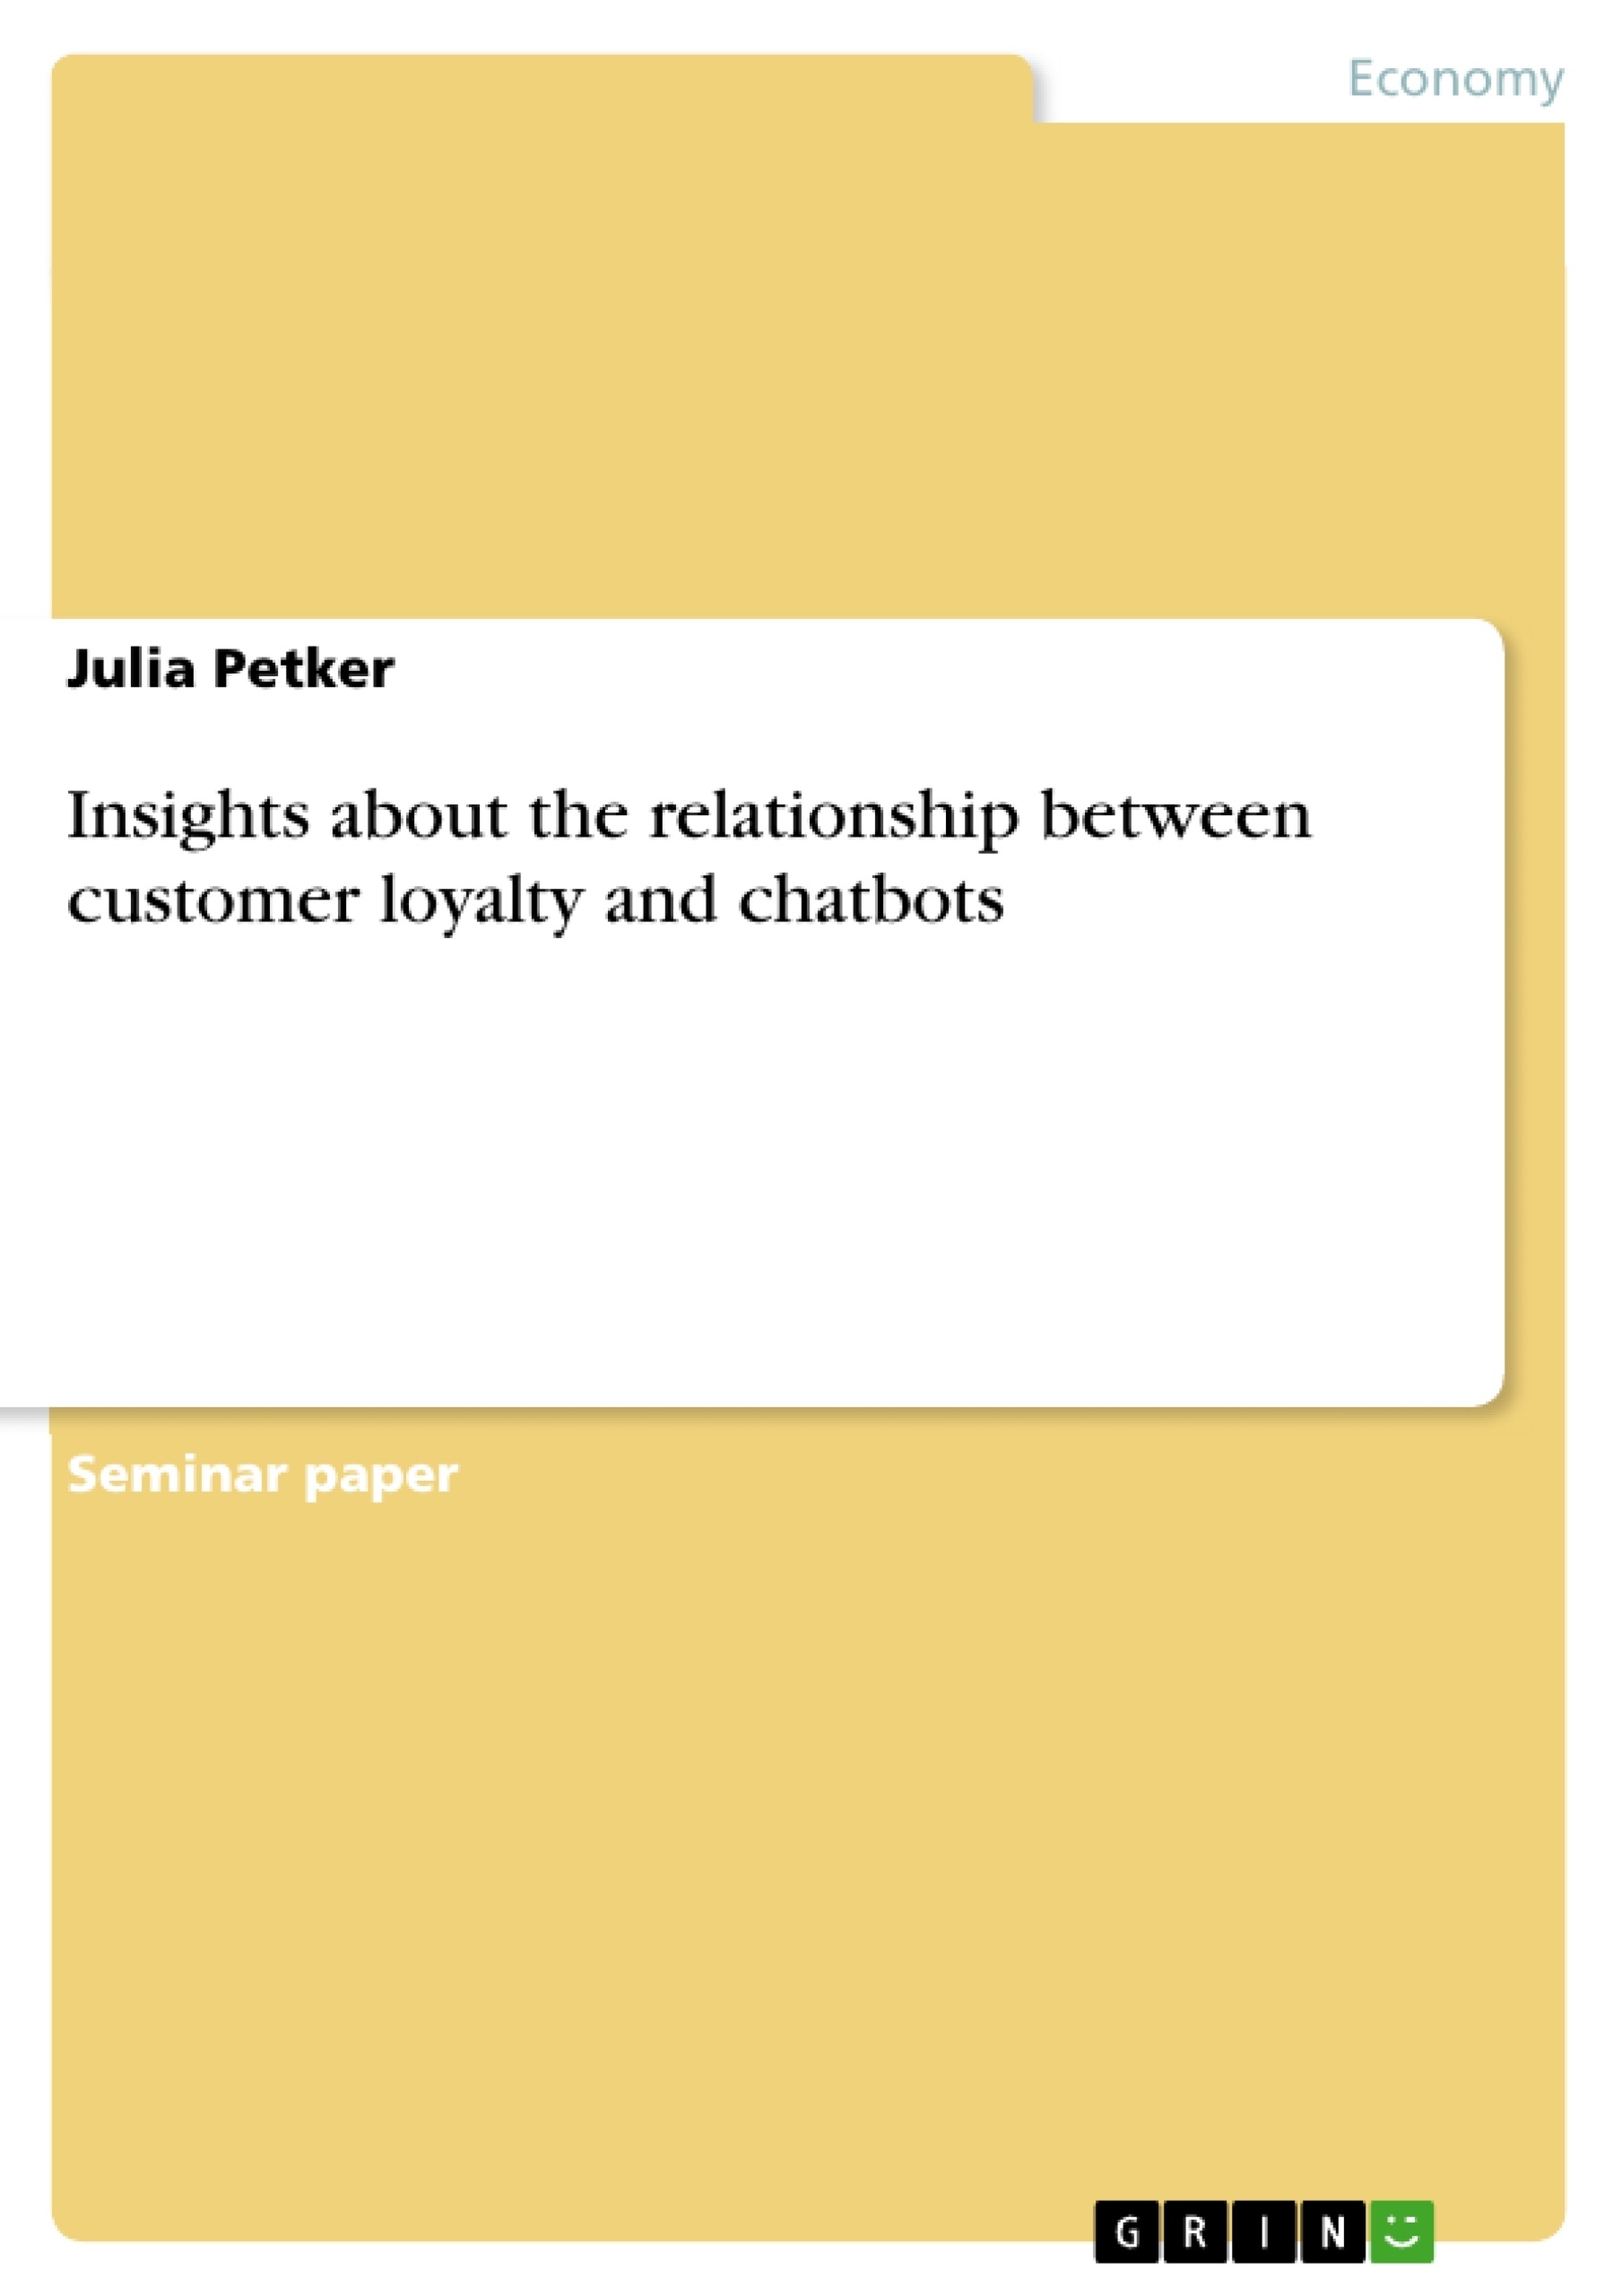 Title: Insights about the relationship between customer loyalty and chatbots